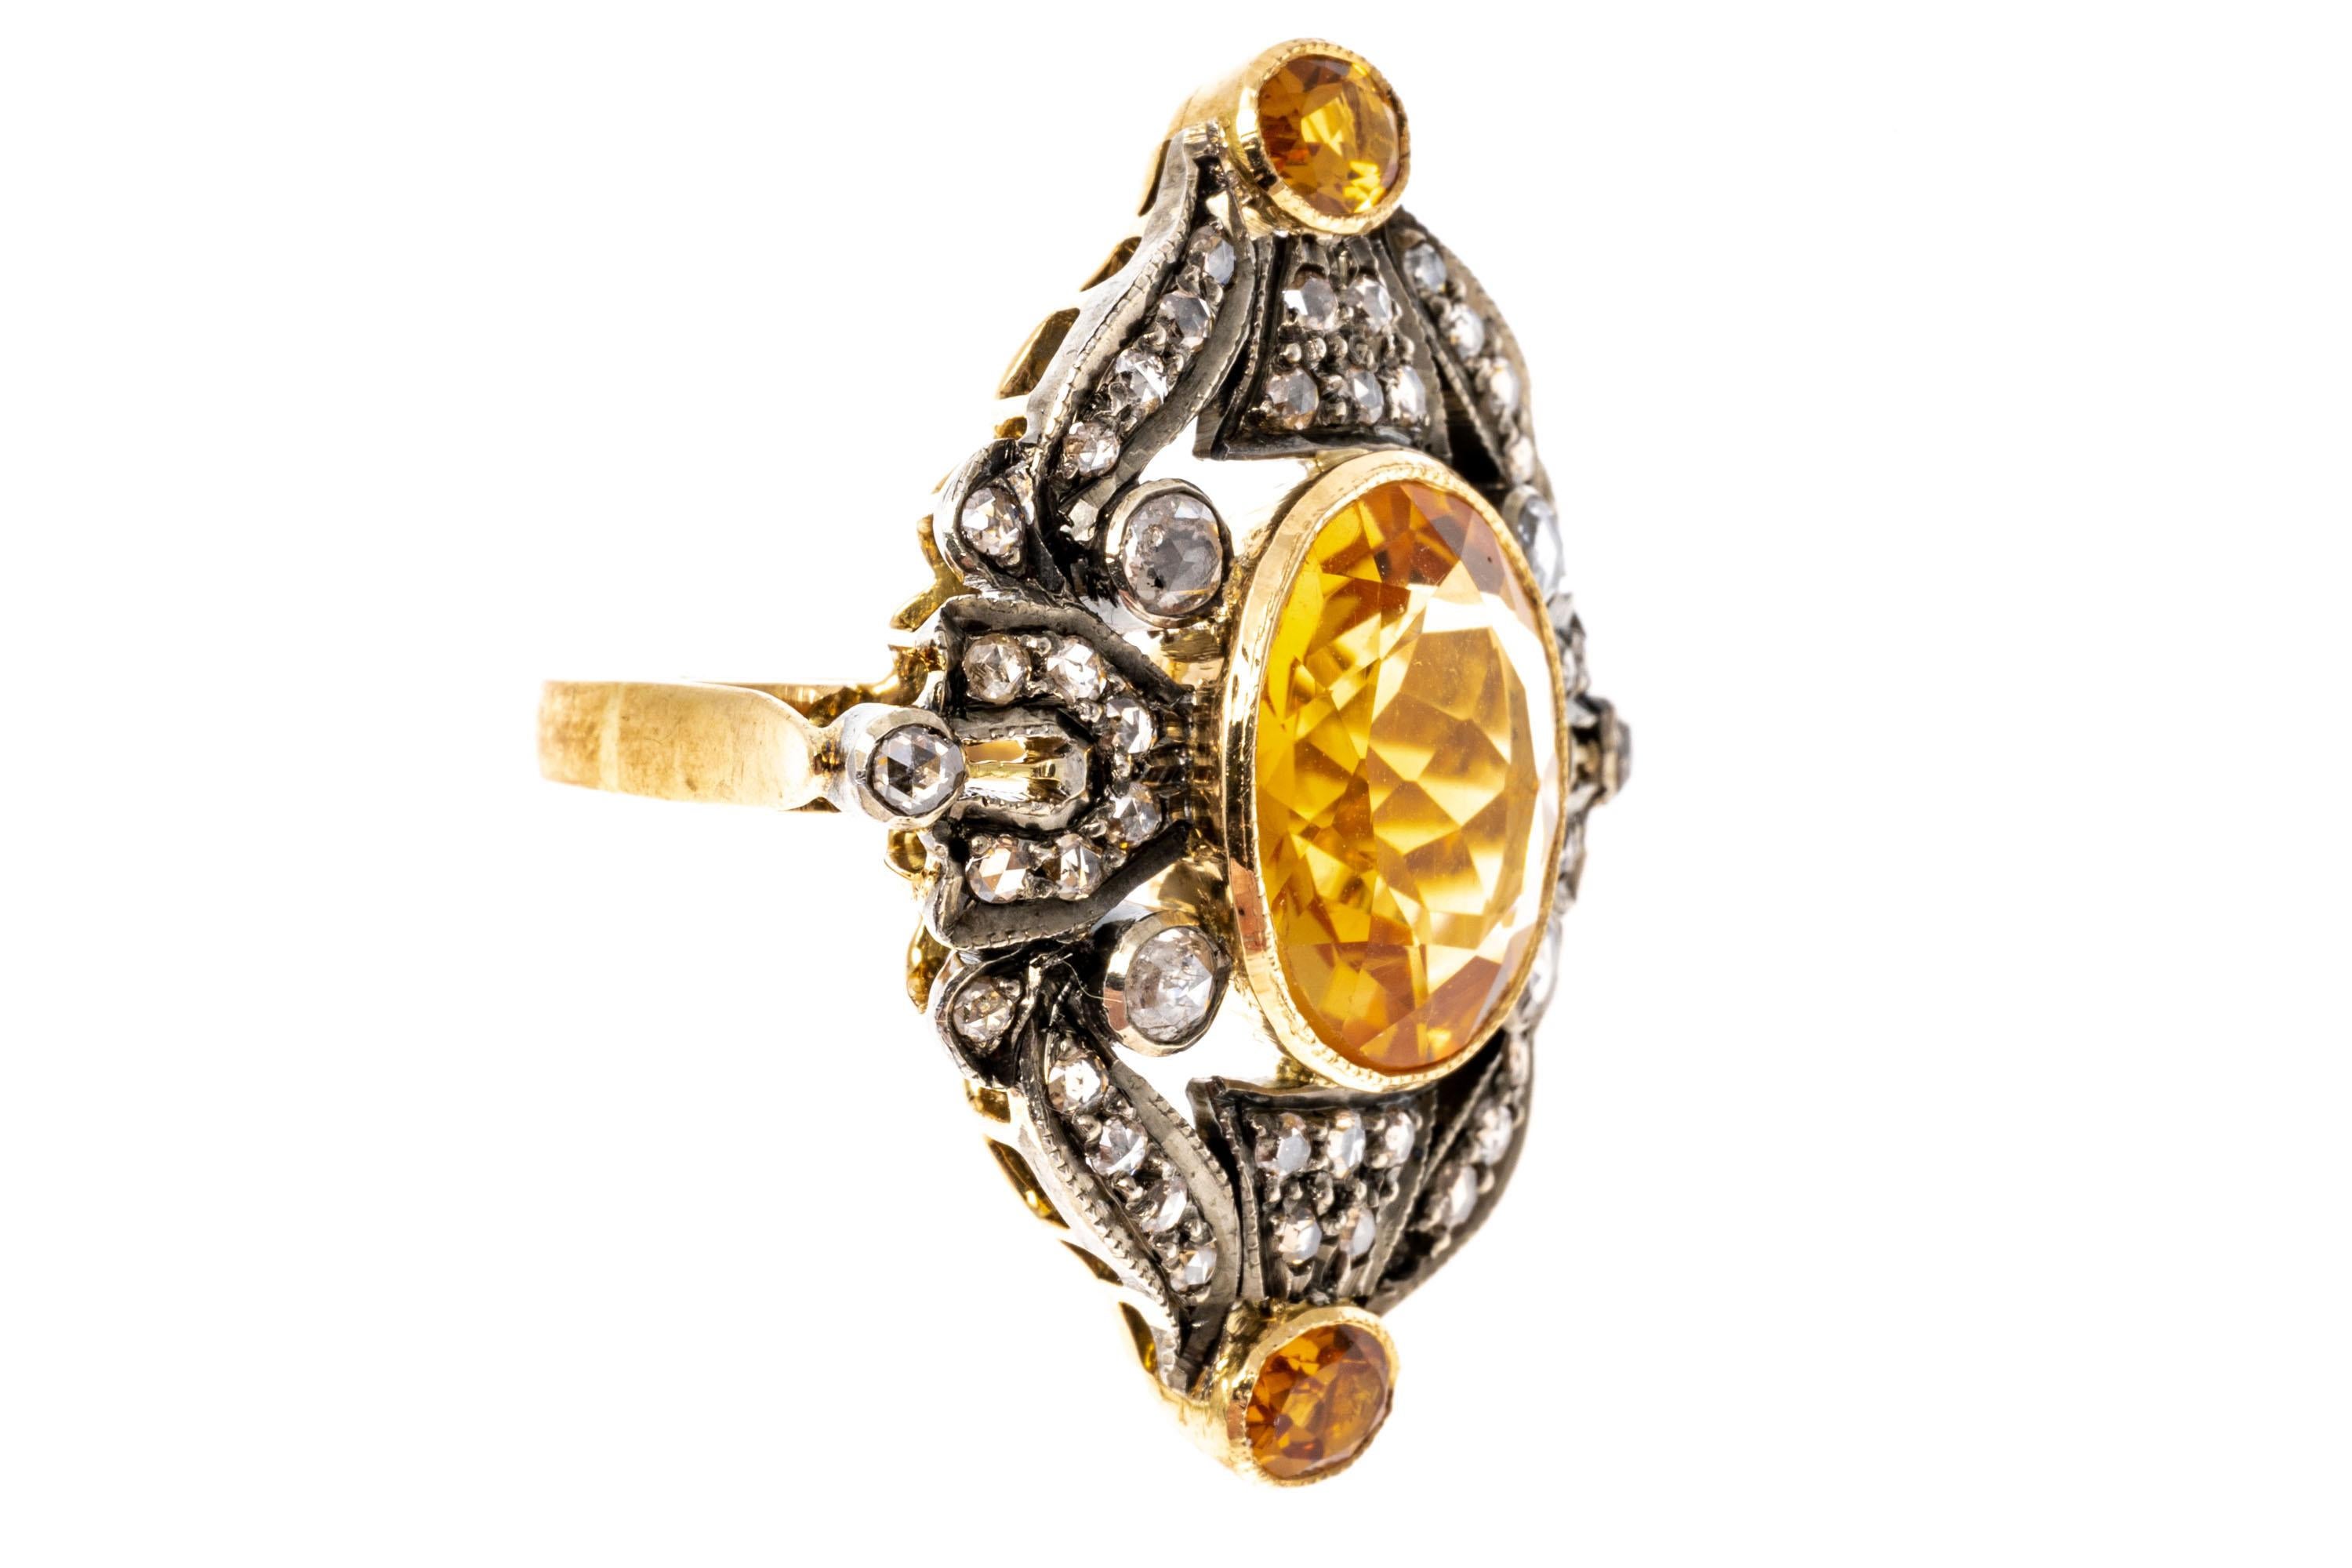 14k yellow gold and sterling silver ring. This stunning vintage ring features a center oval faceted, medium golden yellow color citrine, approximately 5.13 CTS, and bezel set. The center is framed with a decorative filigree set with rose cut faceted